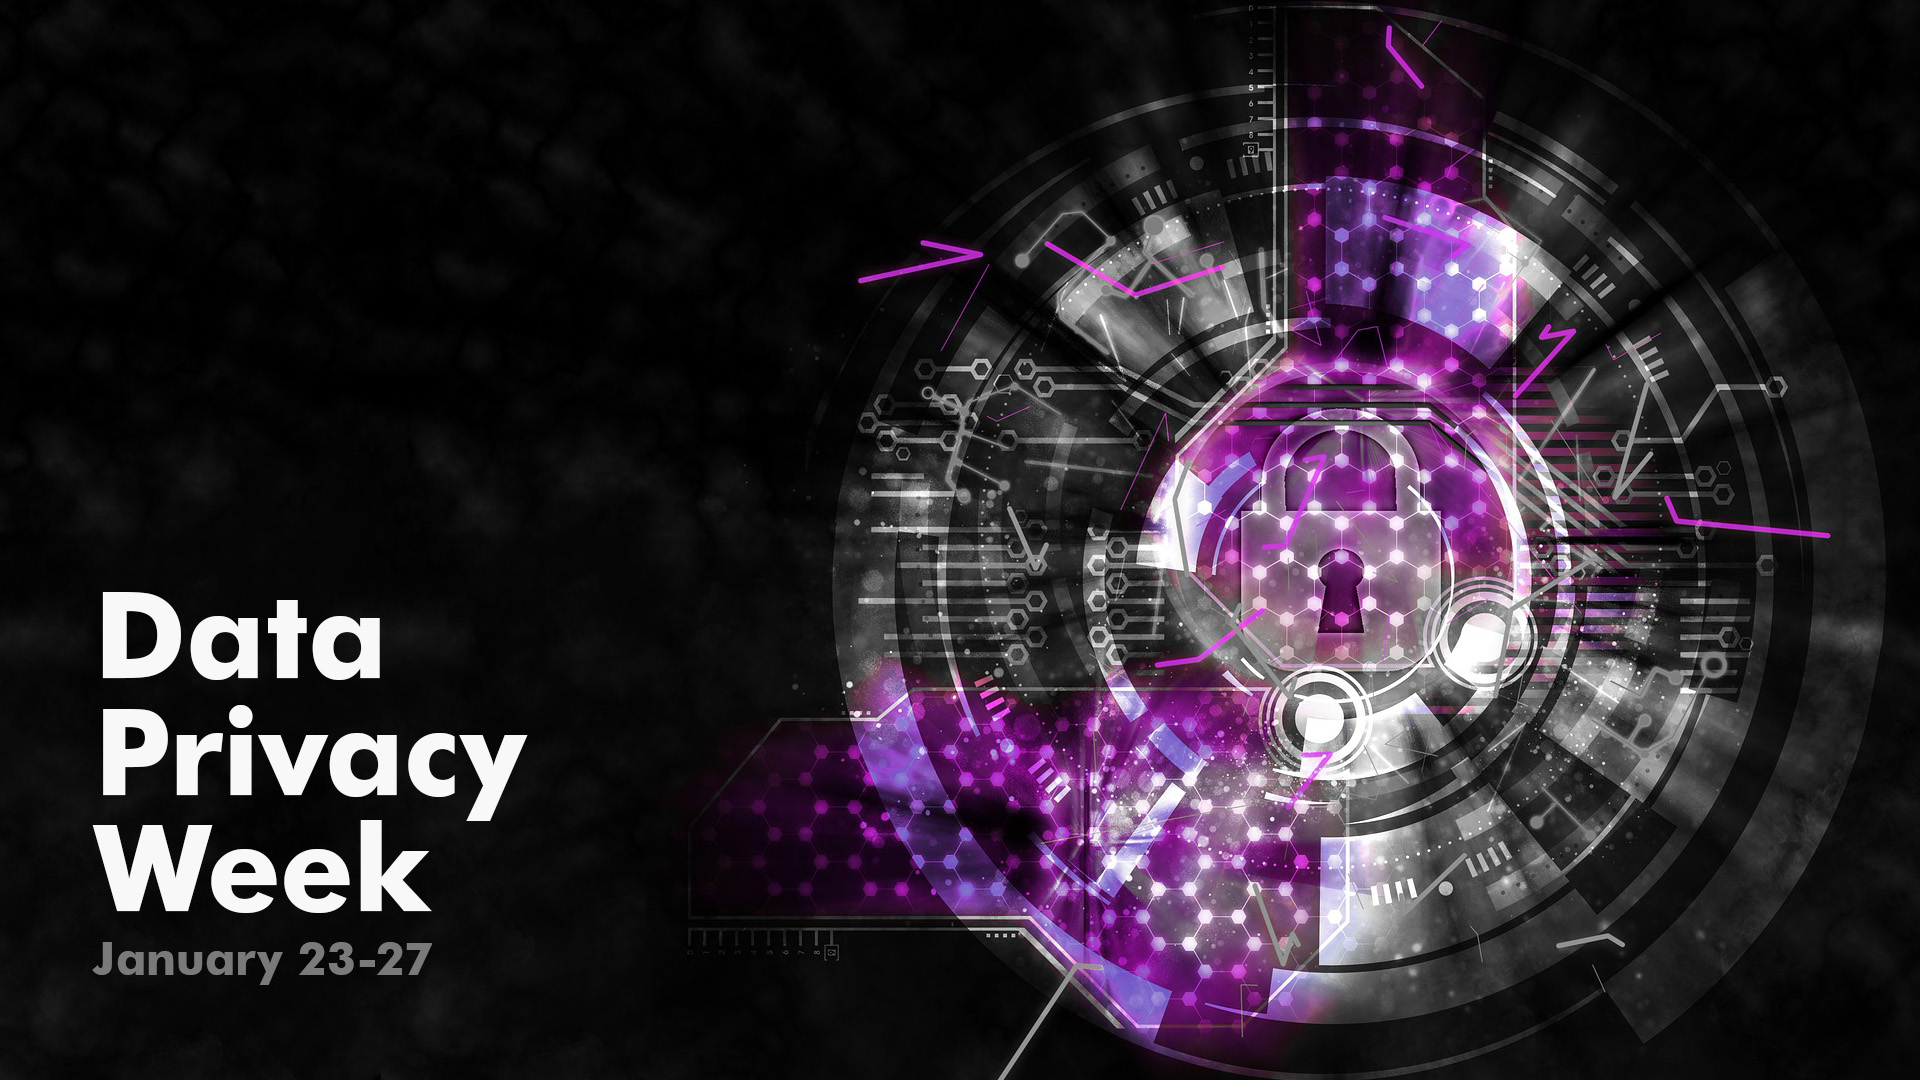 Black background with a circular illustration of grey gears and purple gradients with a lock in the middle. Data Privacy Week is spelt out on the bottom left corner.